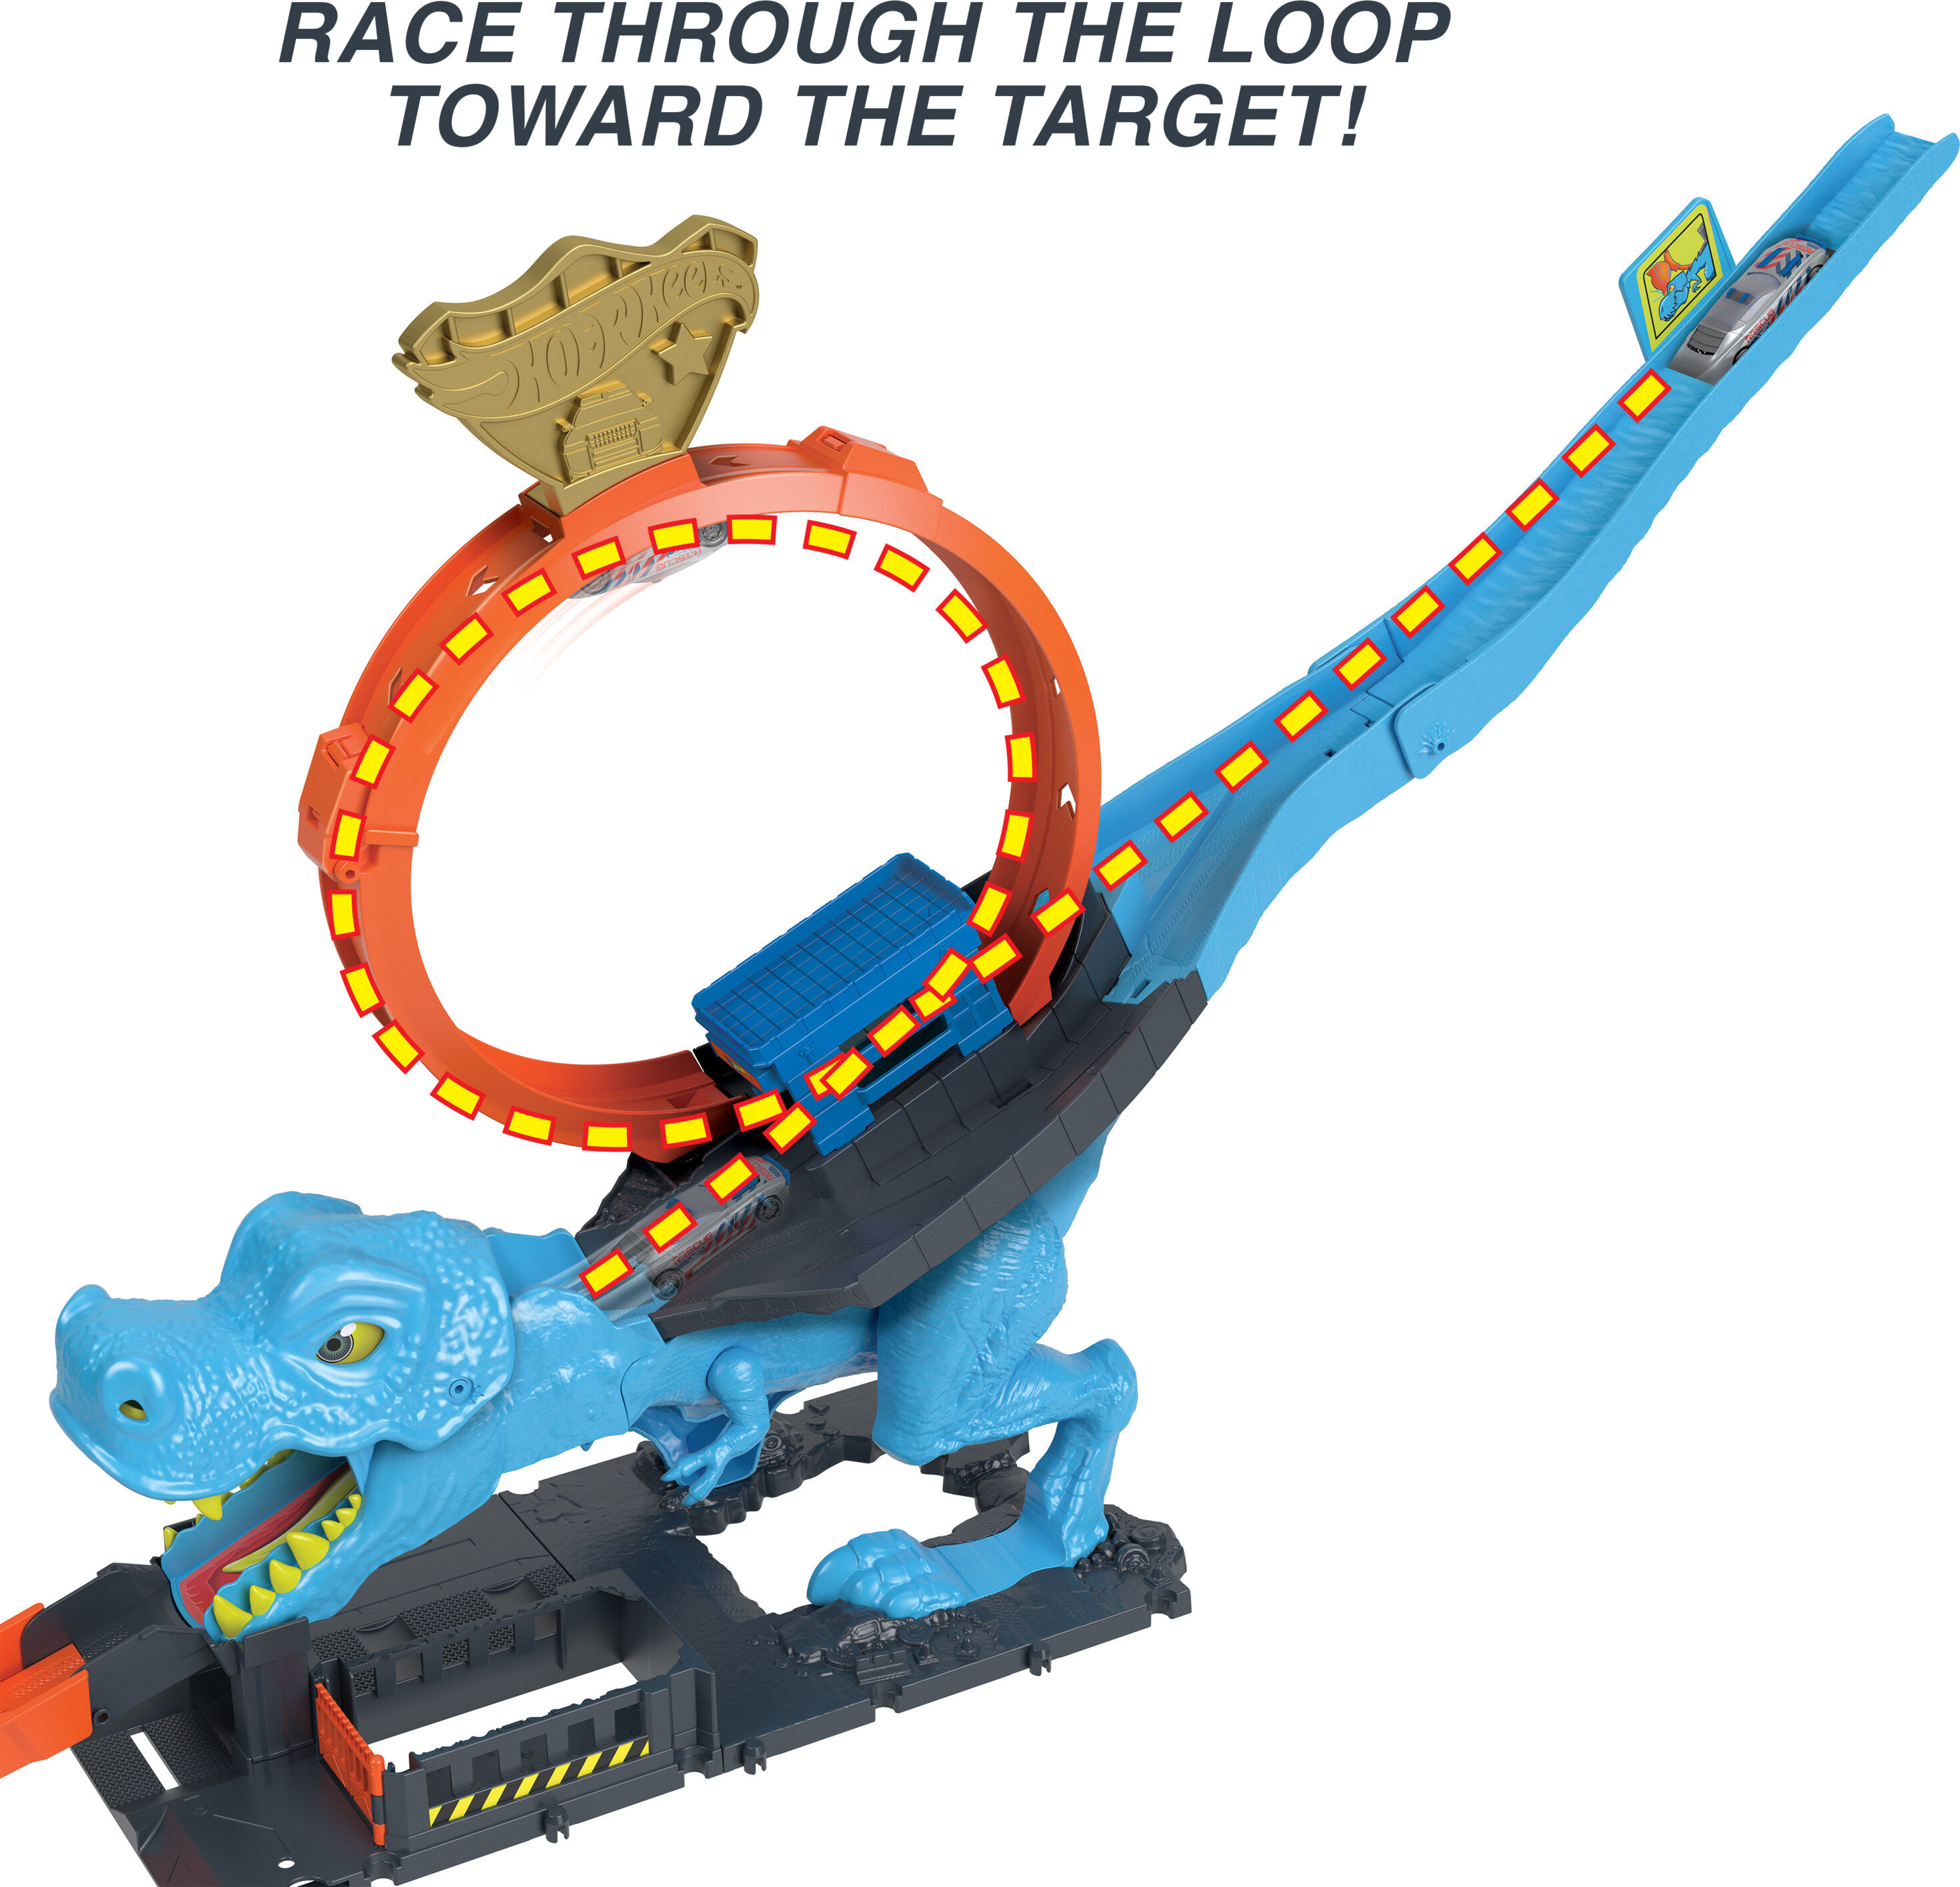 Hot Wheels City T-Rex Dinosaur Chomp-Down Track Set with a Huge Loop & 1:64 Scale Toy Car for Age 3 - 5 - image 5 of 7